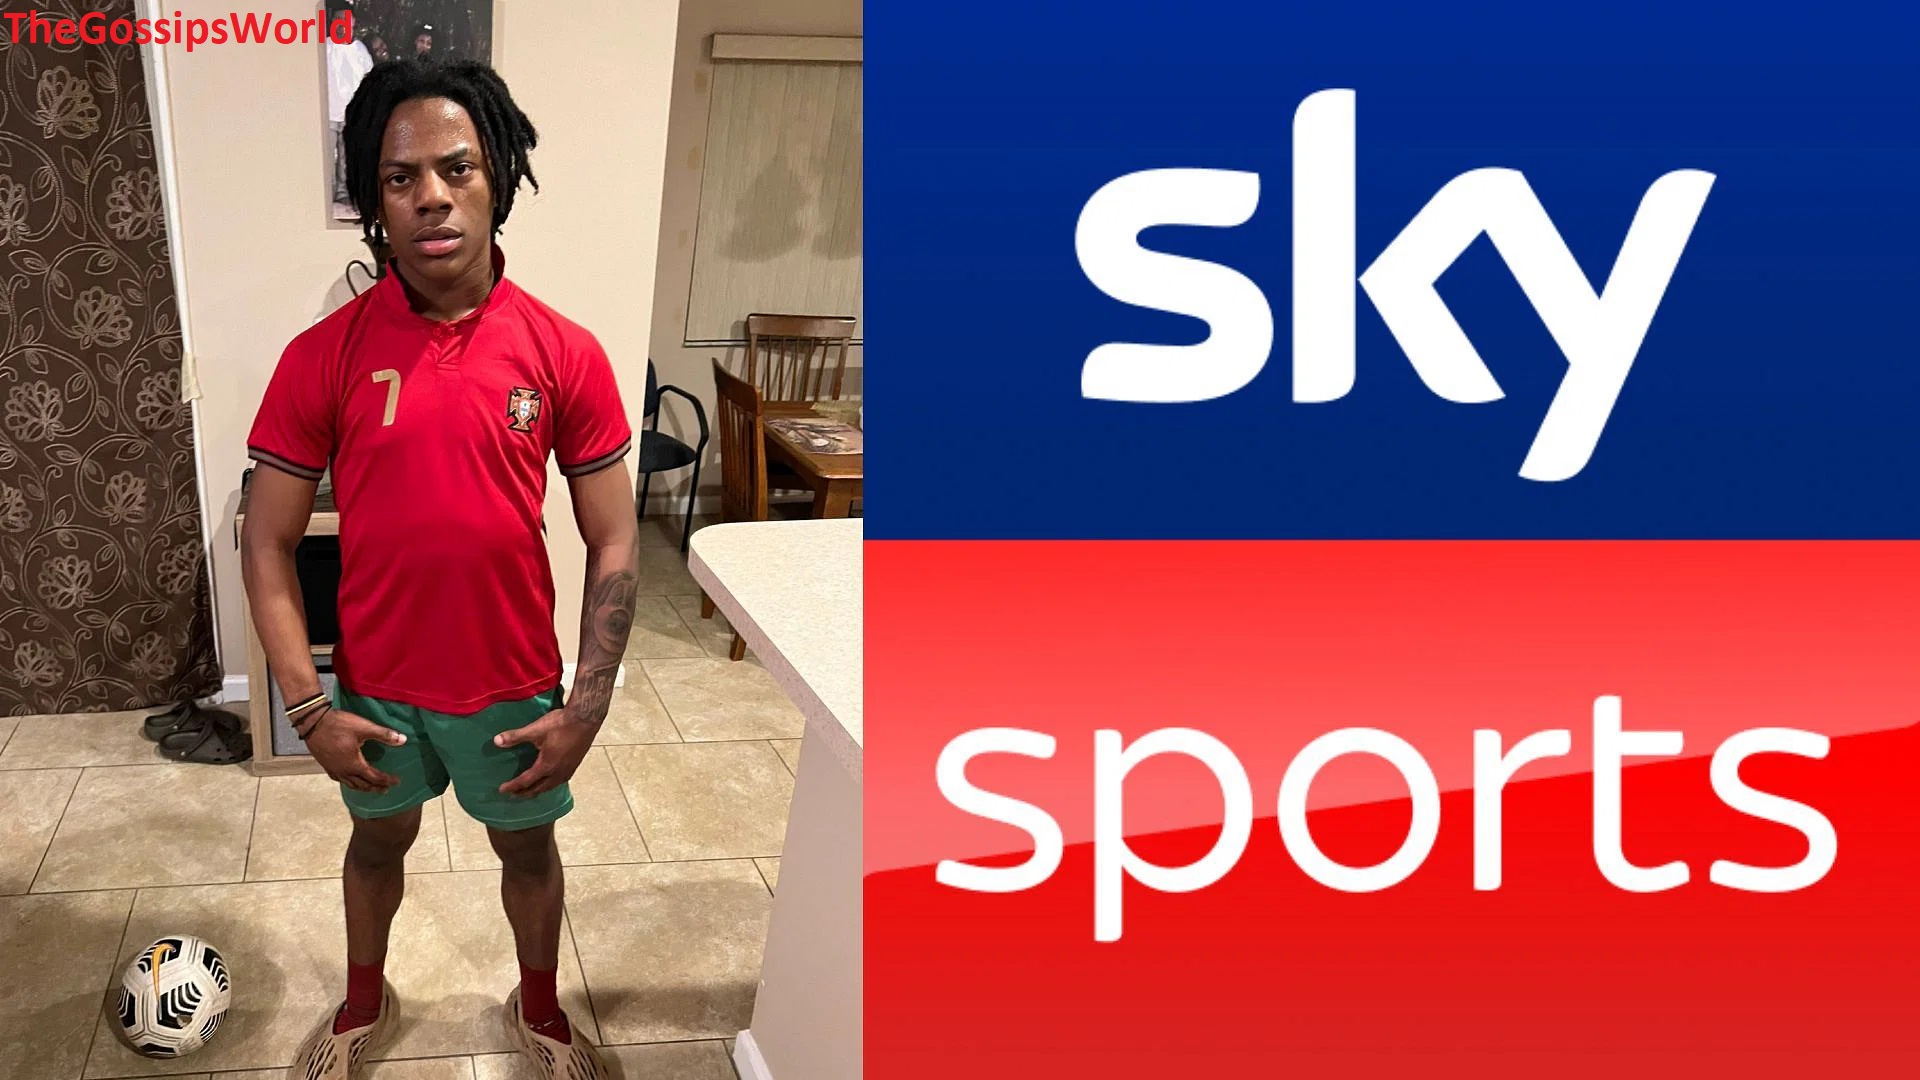 Why Did Sky Sports Remove Association With YouTuber Darren IShowSpeed?